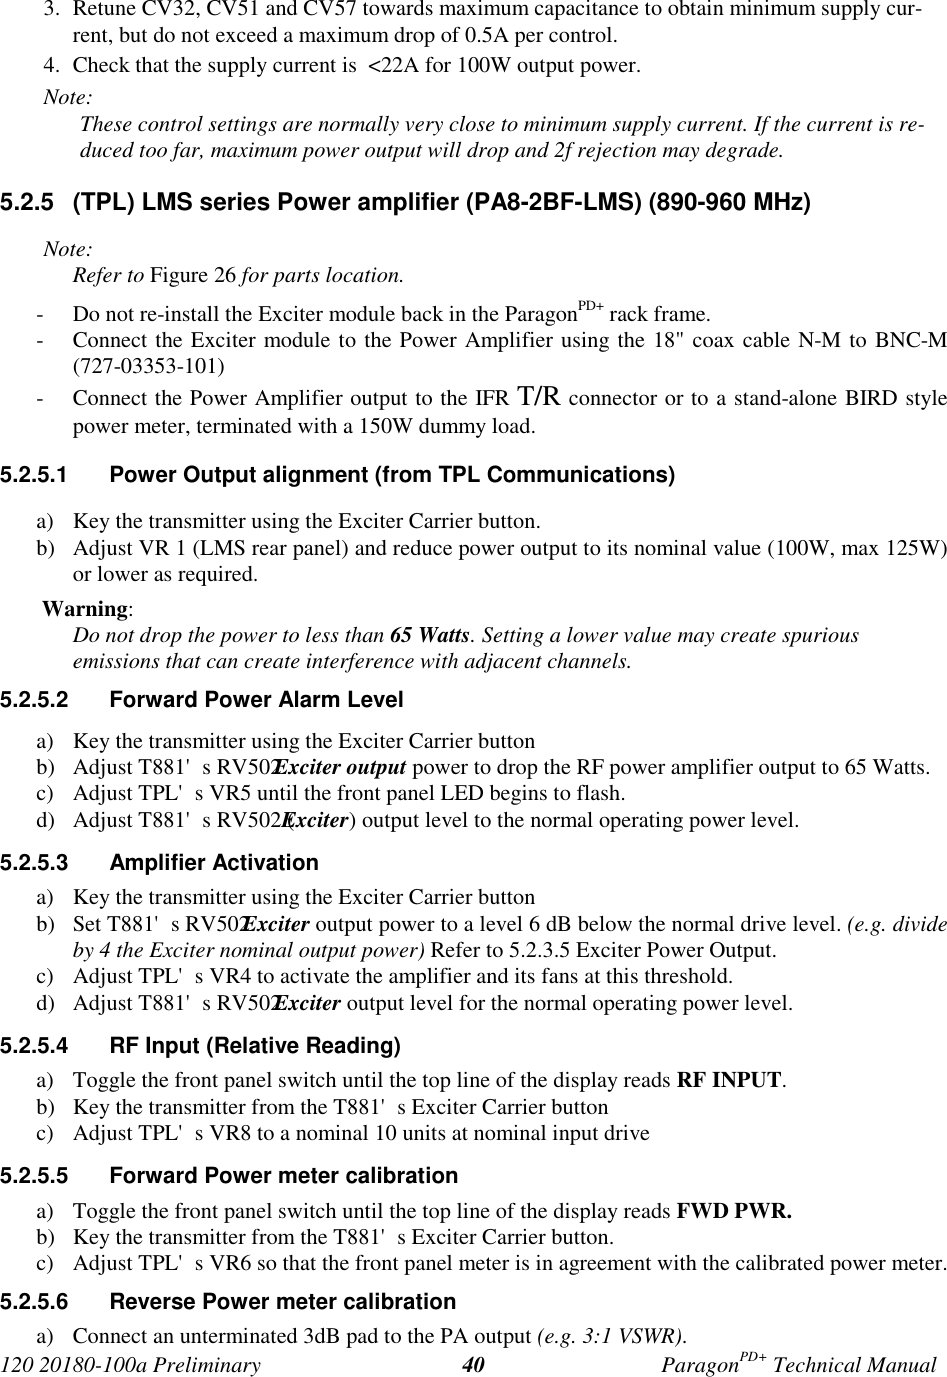 Page 47 of CalAmp Wireless Networks BDD4T85-1 Paragon/PD User Manual Parg PD  T100a Prelim